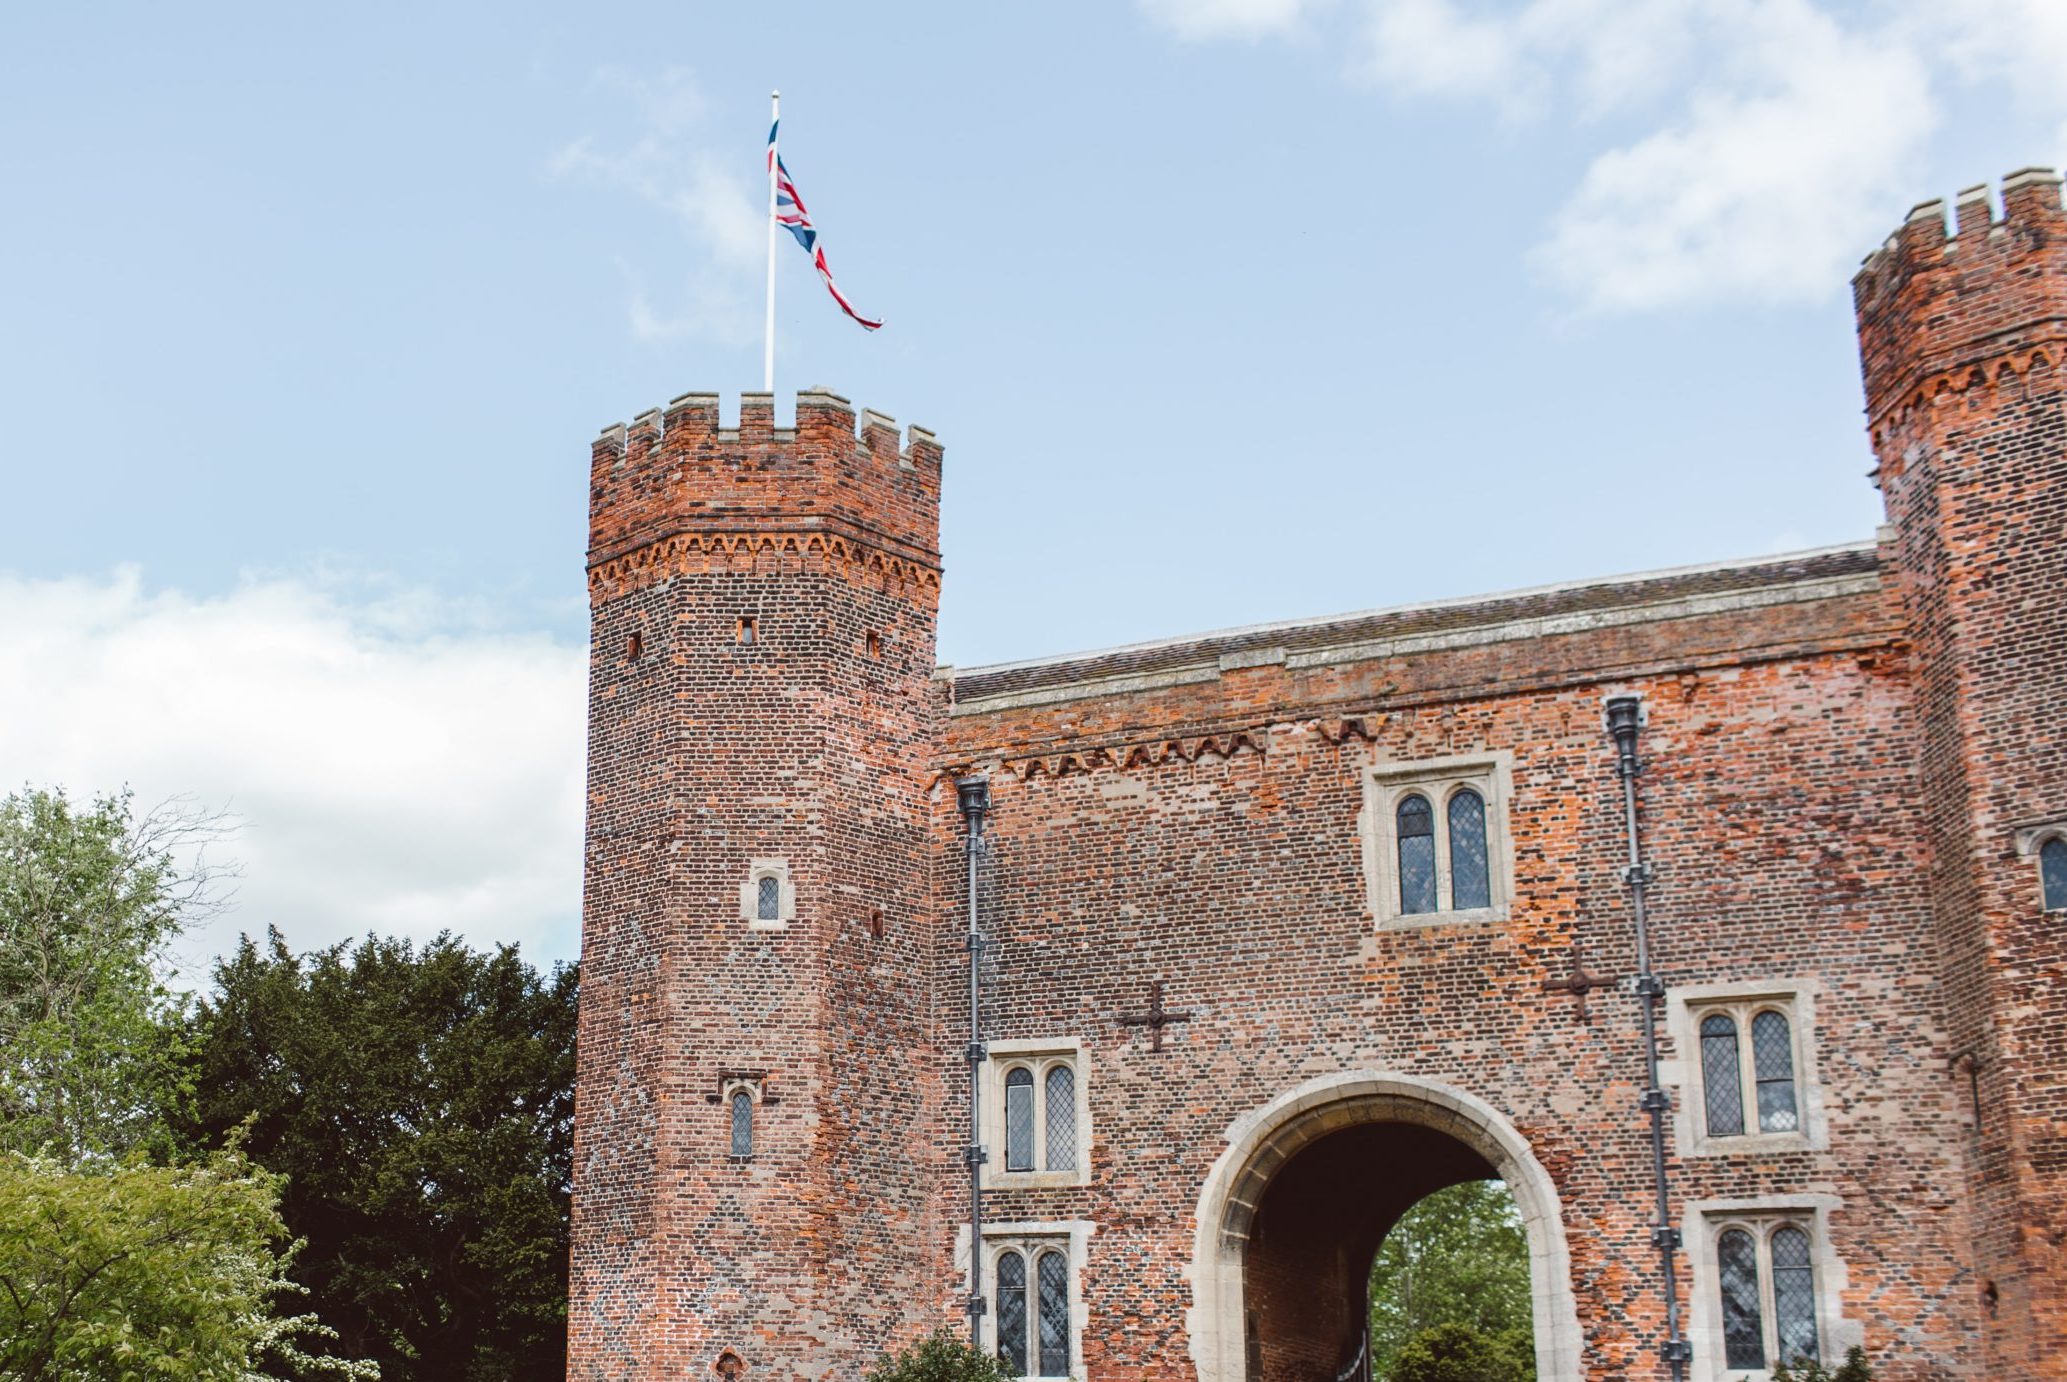 Exterior view of a castle flying the British flag